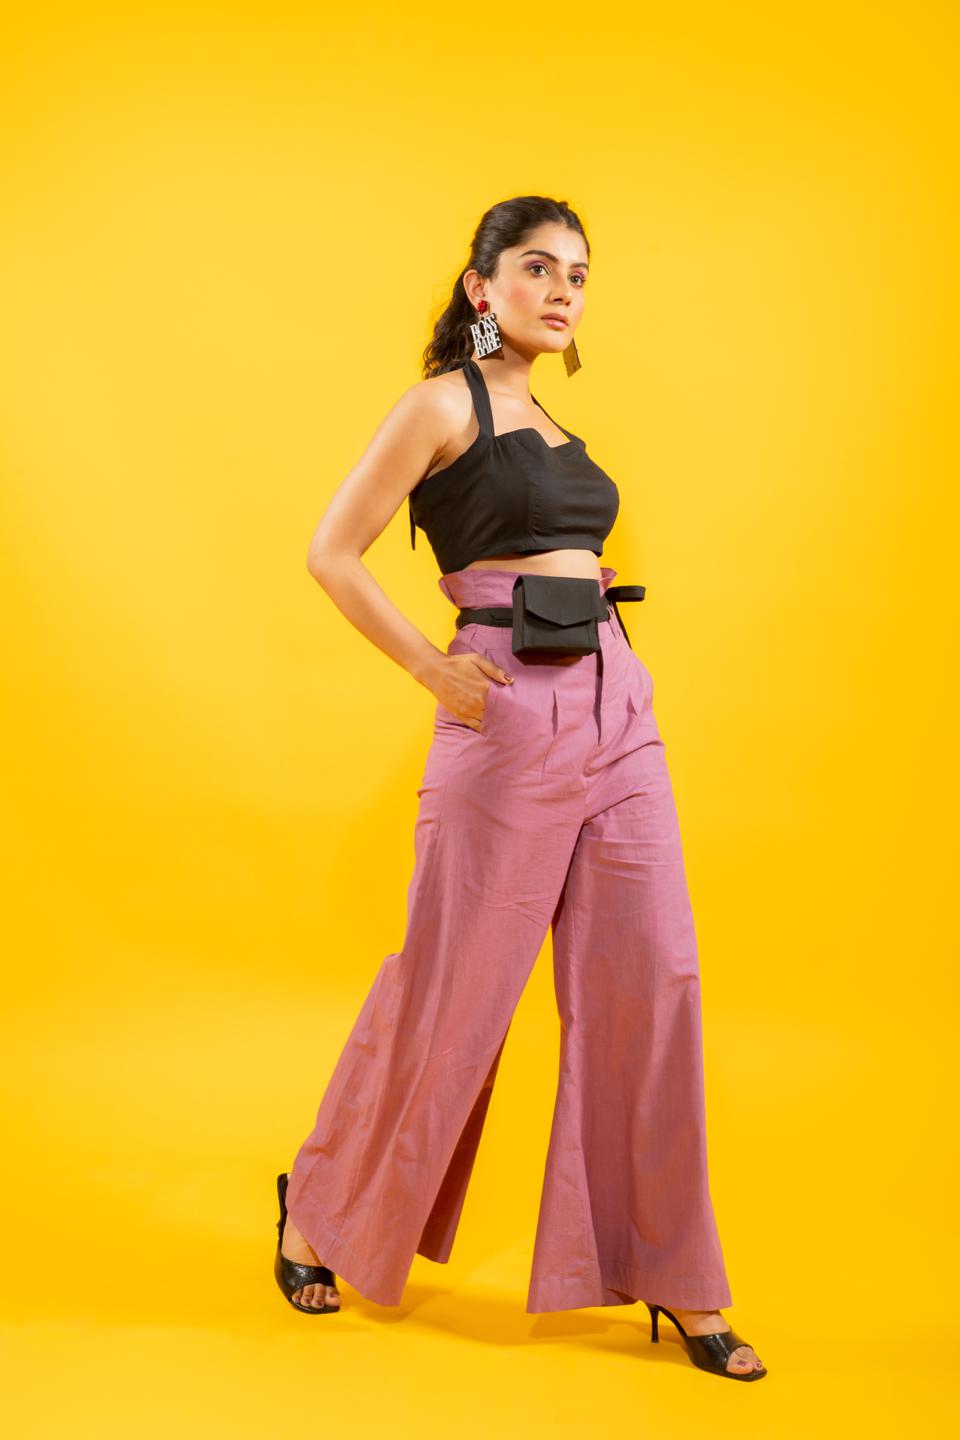 statement-black-halter-top-with-high-waisted-mauve-flared-pants-11740099BK, Women Clothing, Cotton Matching Set